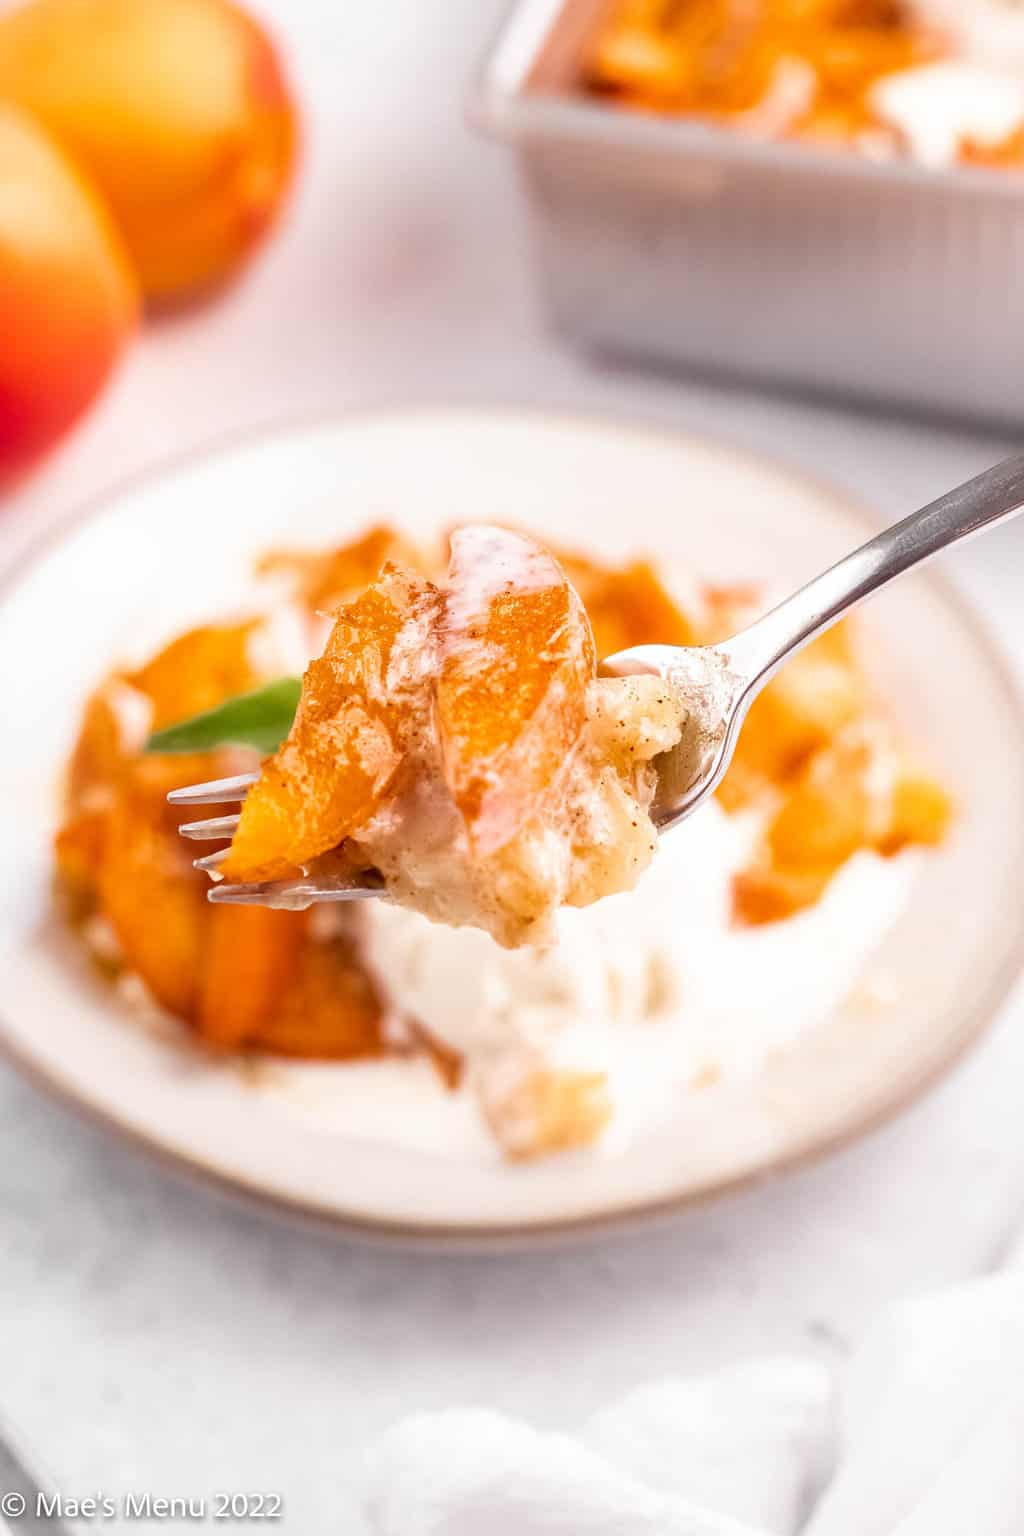 A forkful of apricot cobbler with a small plate of the cobbler in the background.